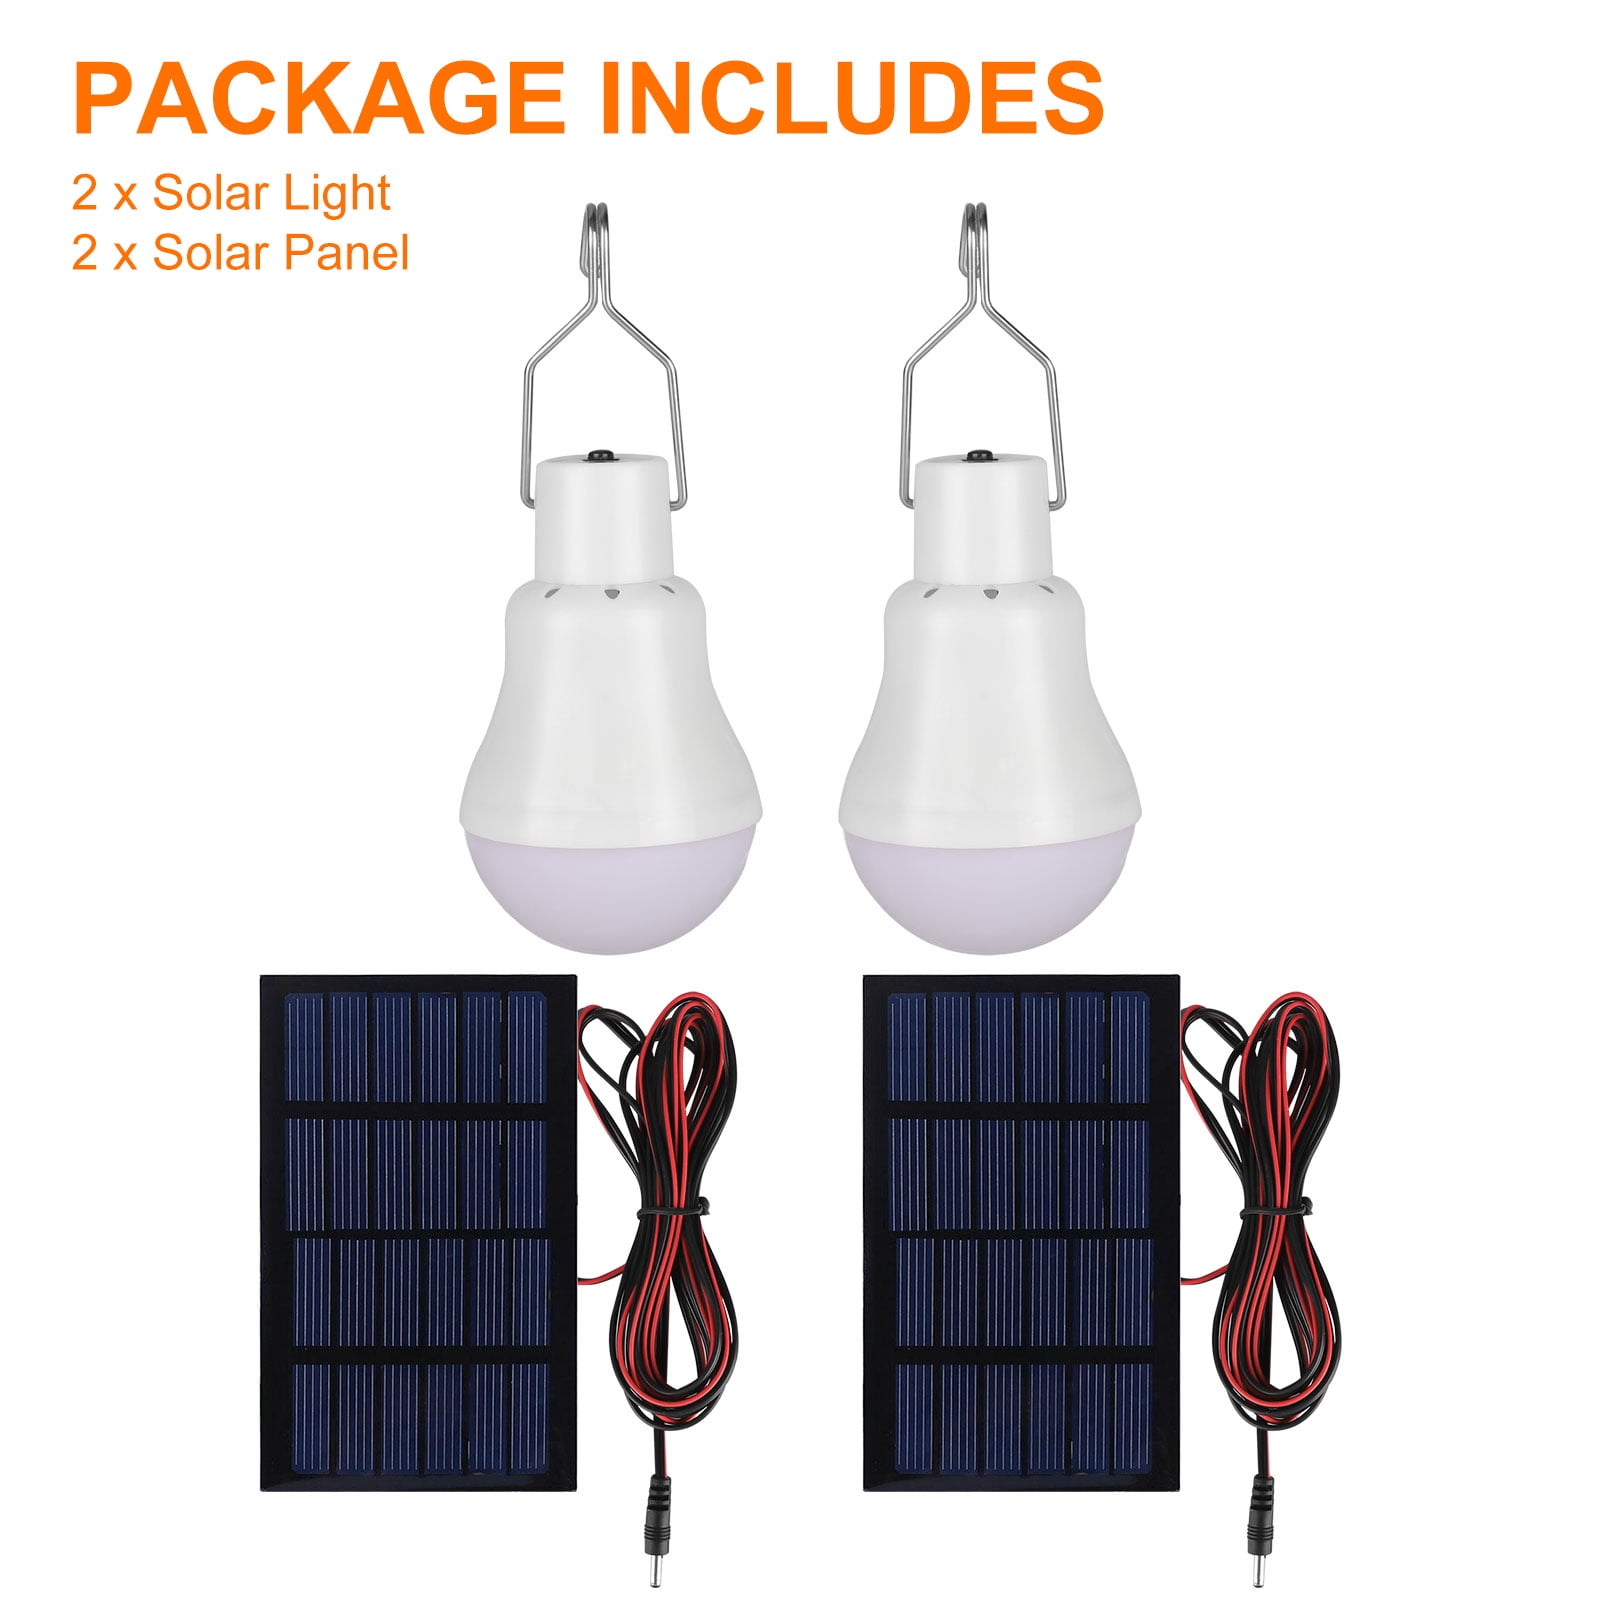 Solar Panel Powered LED Bulb Lamp Portable Camp Tent Fishing Light Hook Outdoor 